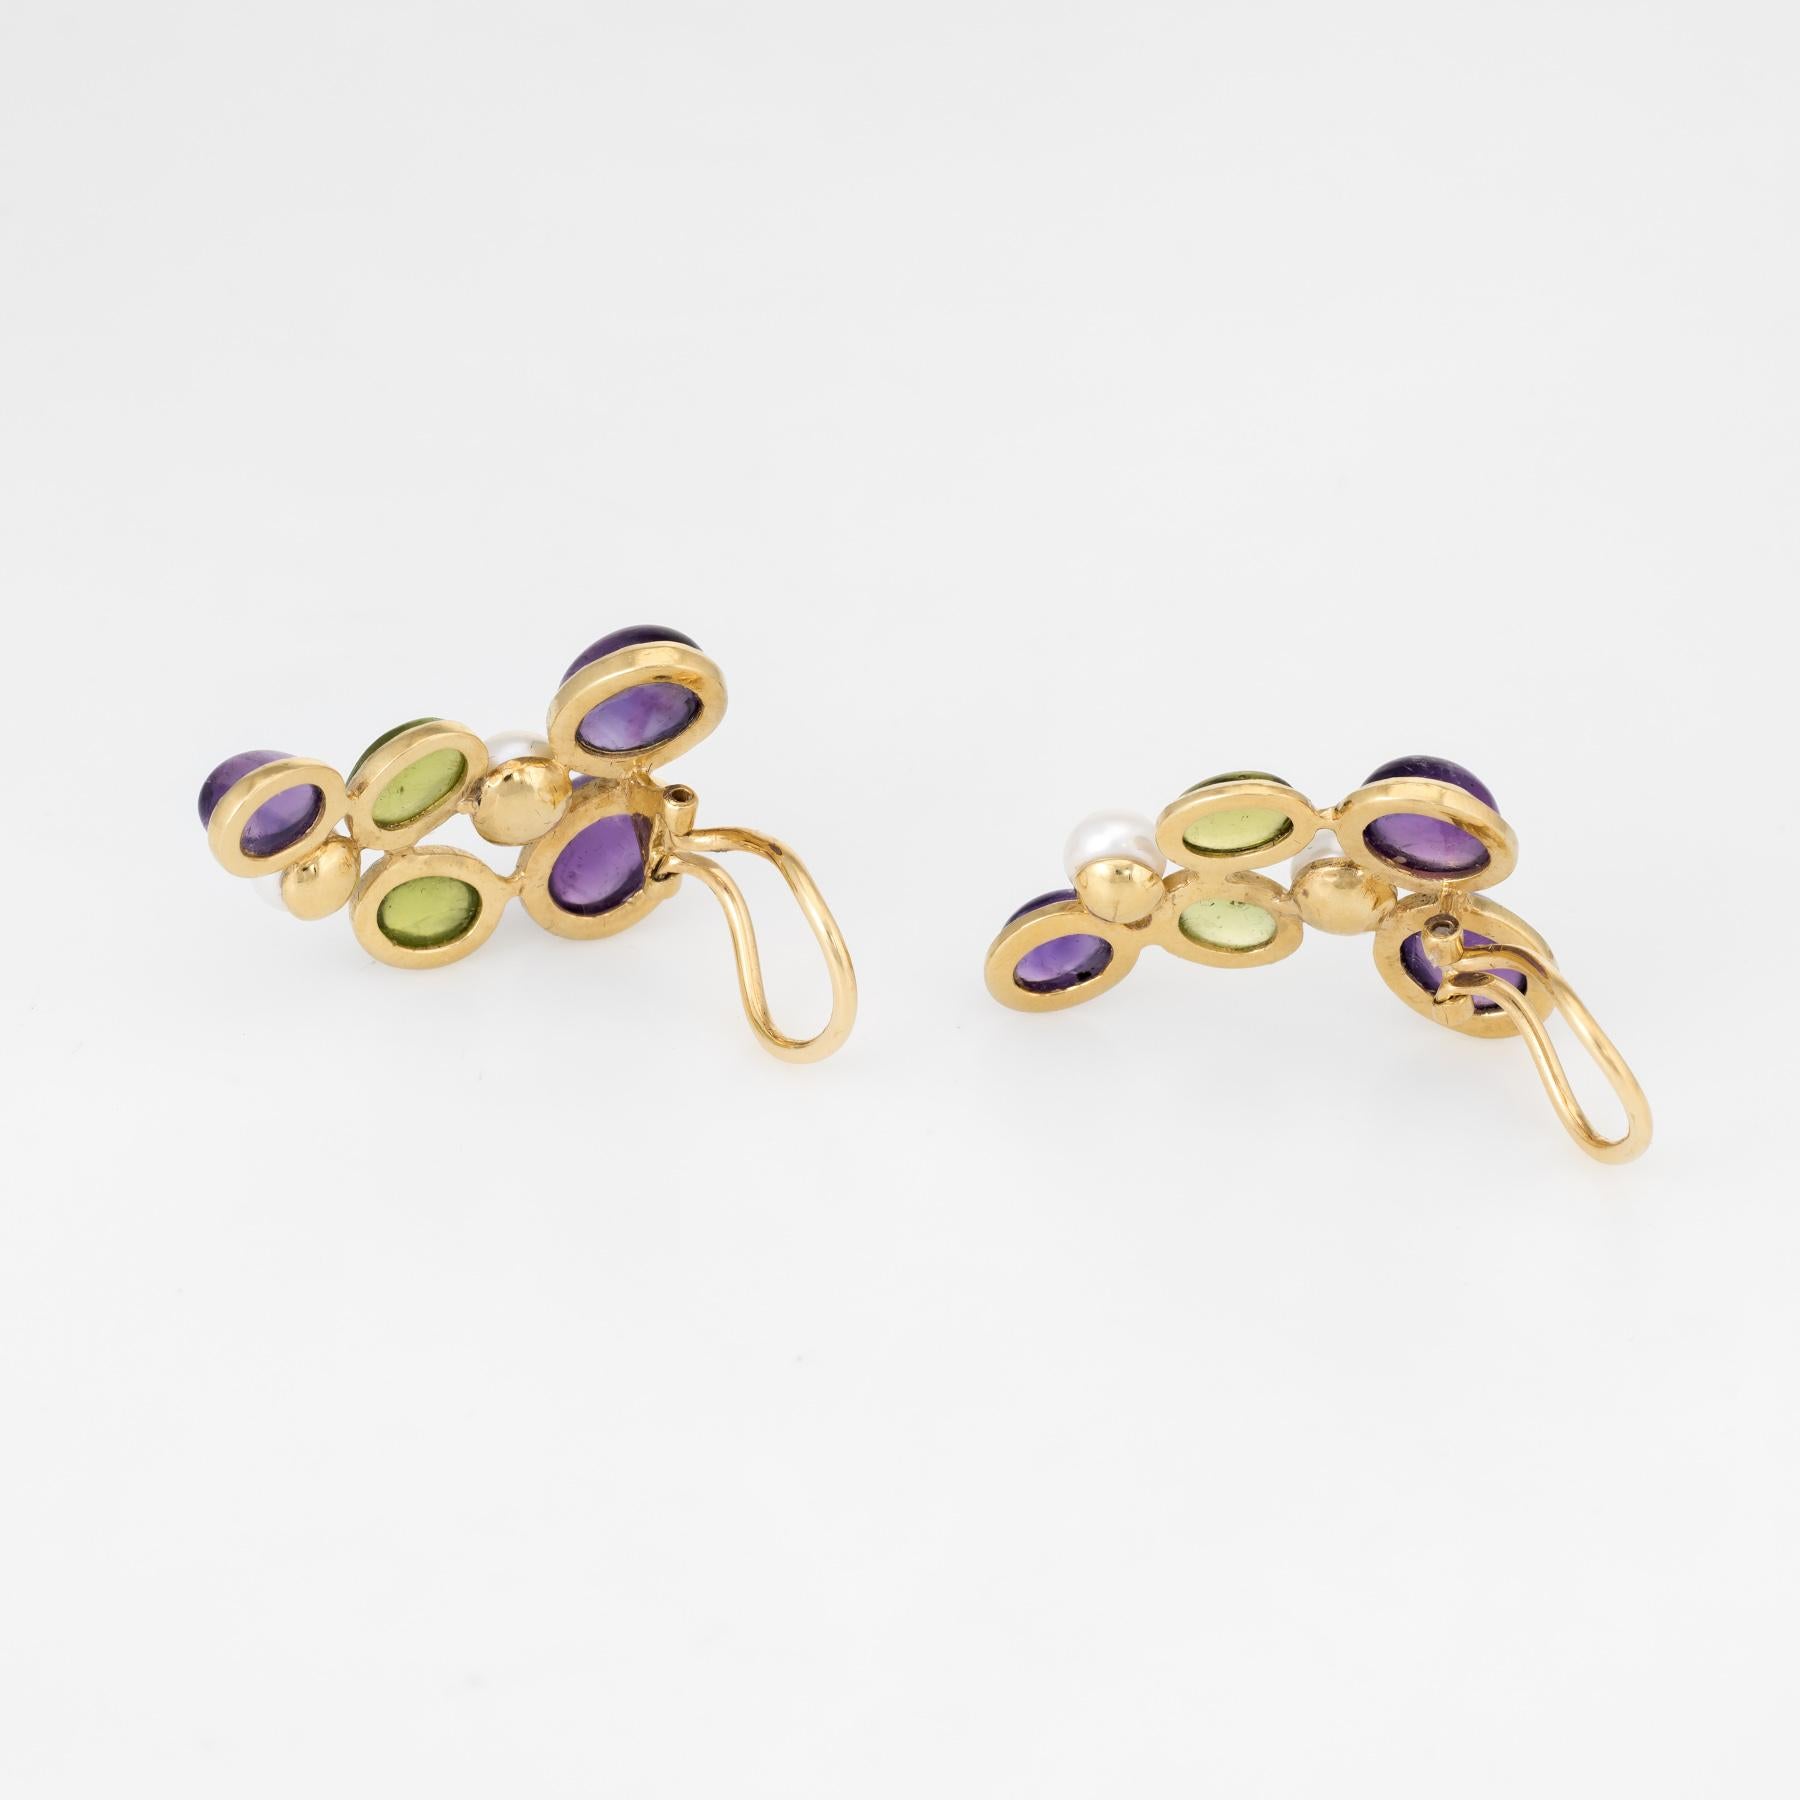 Finely detailed pair of vintage clip earrings, crafted in 18k yellow gold. 

Cabochon cut peridot measures 8mm x 6mm (estimated at 1 carat each - 4 carats total estimated weight), accented with cabochon cut amethyst that measures 9.5mm x 8mm and